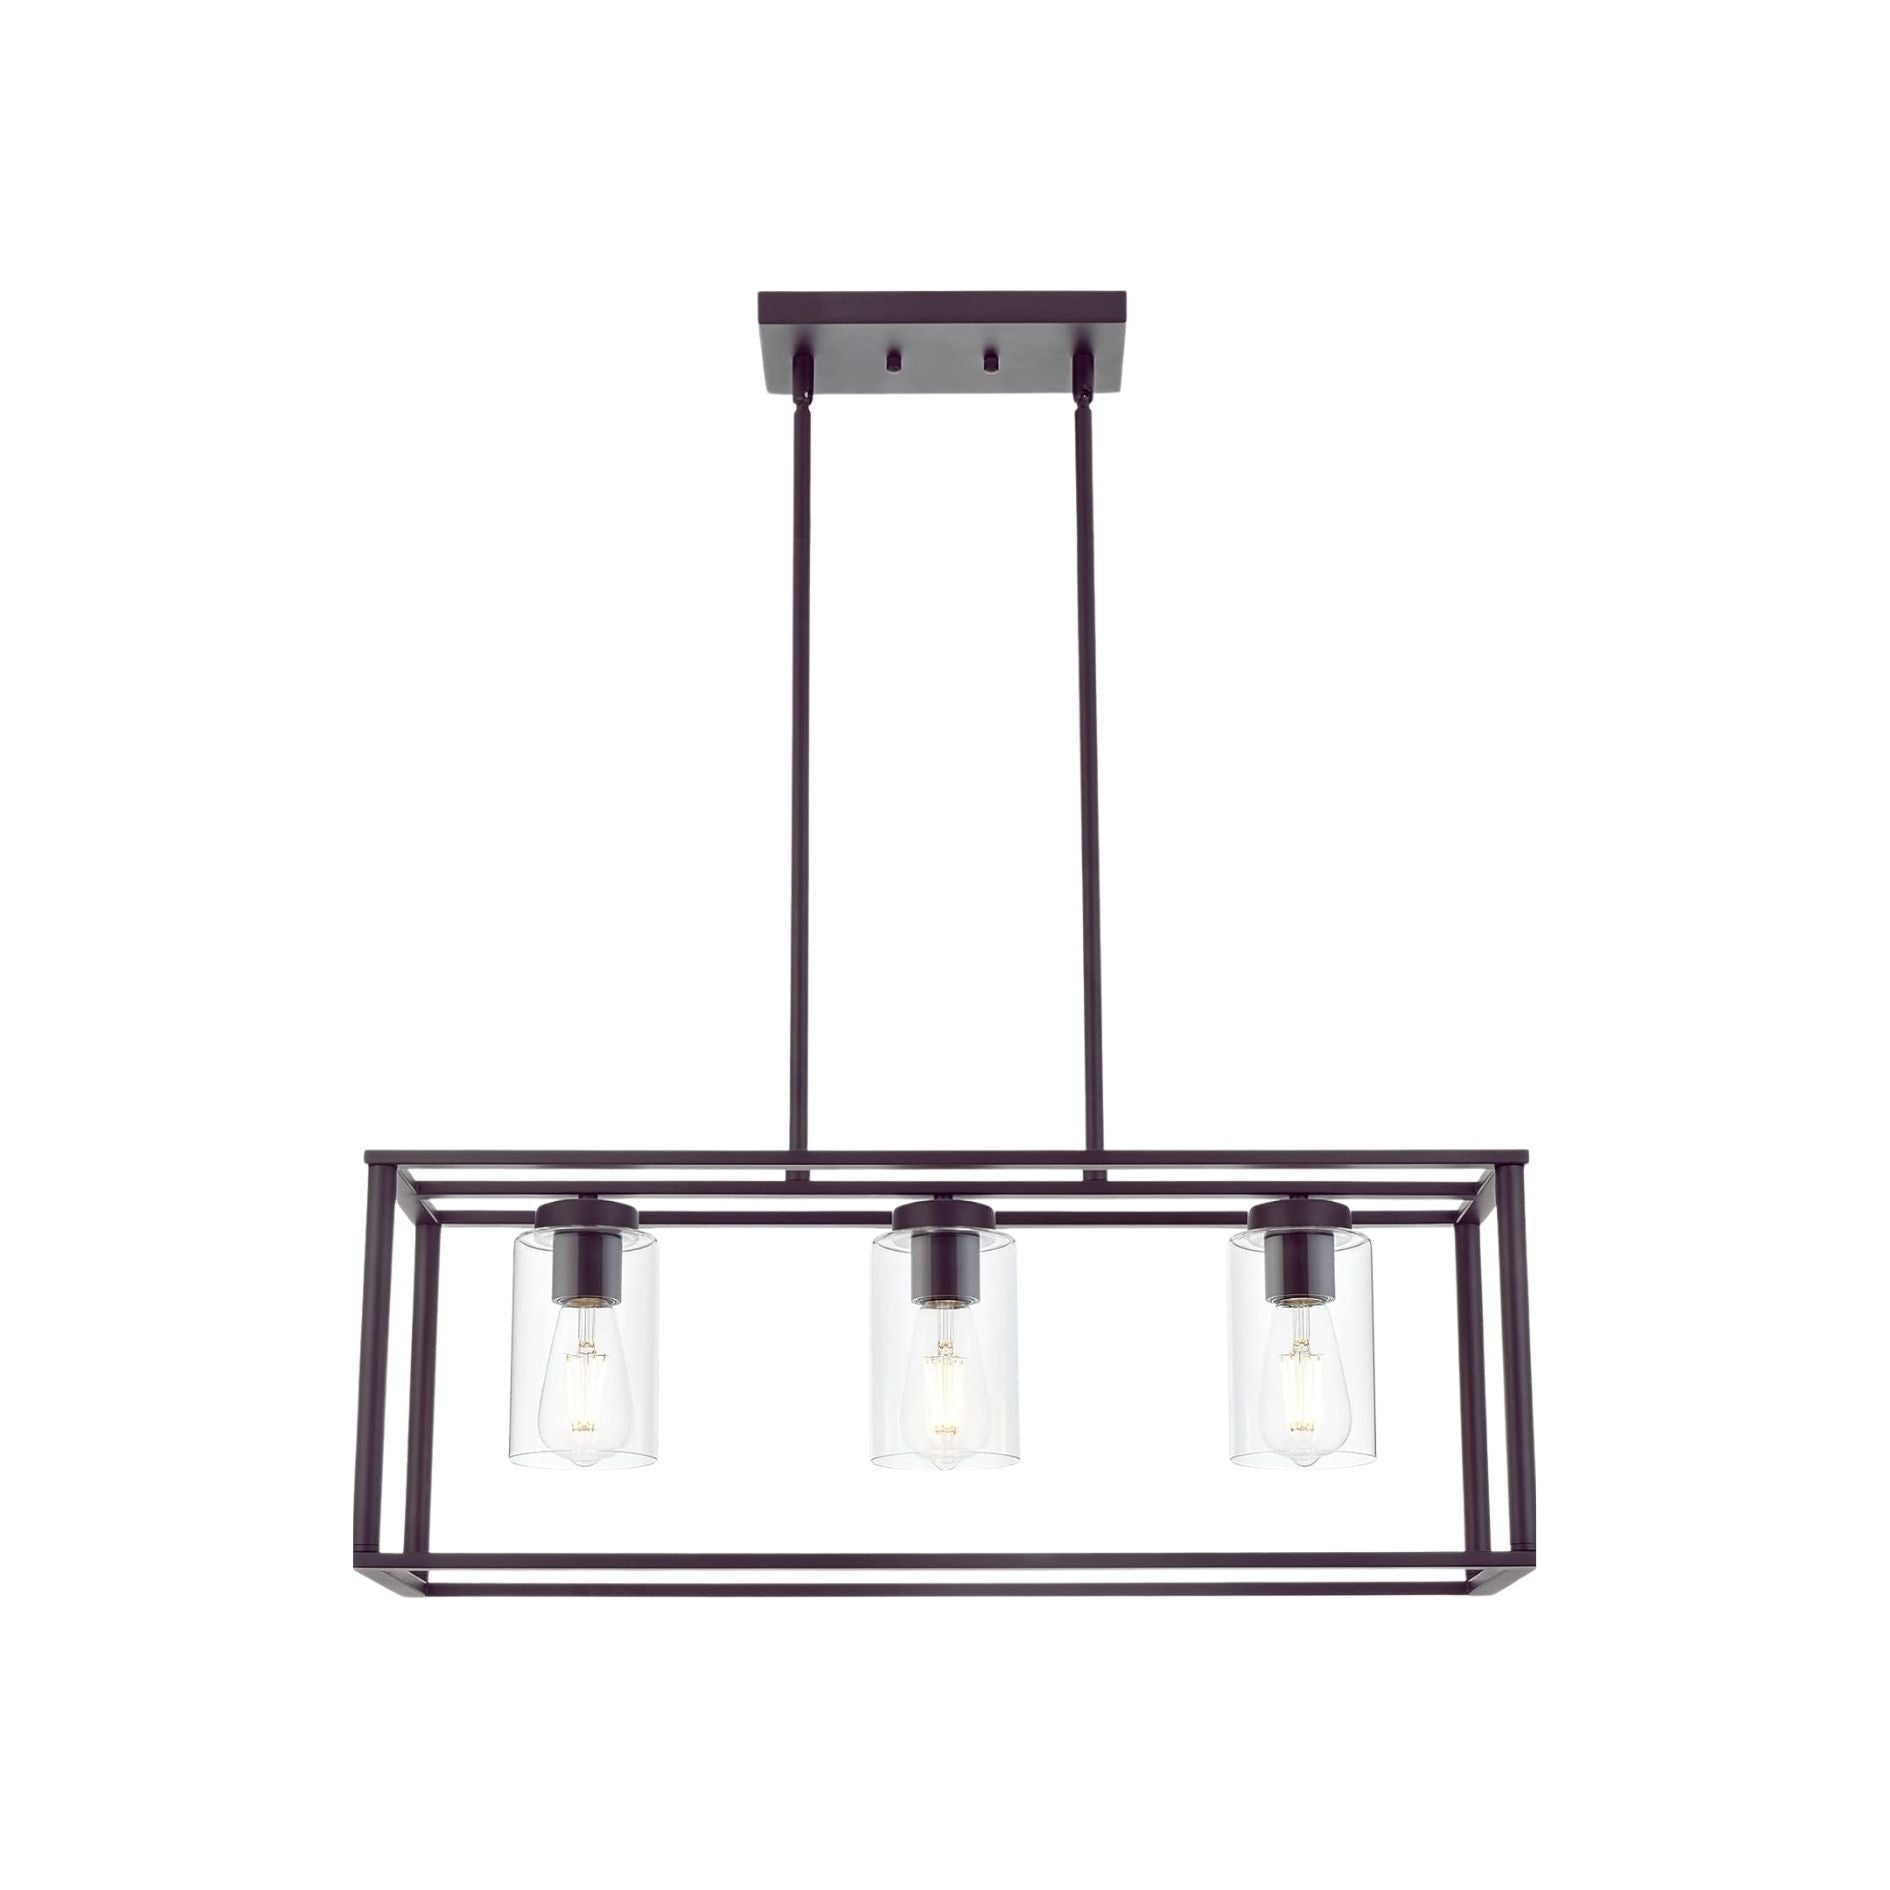 TM-HOME-Contemporary-Chandeliers-Black-3-Light-Modern-Dining-Room-Lighting-Fixtures-,-Flush-Mount-Ceiling-Light-with-Glass-Shade-Lamps